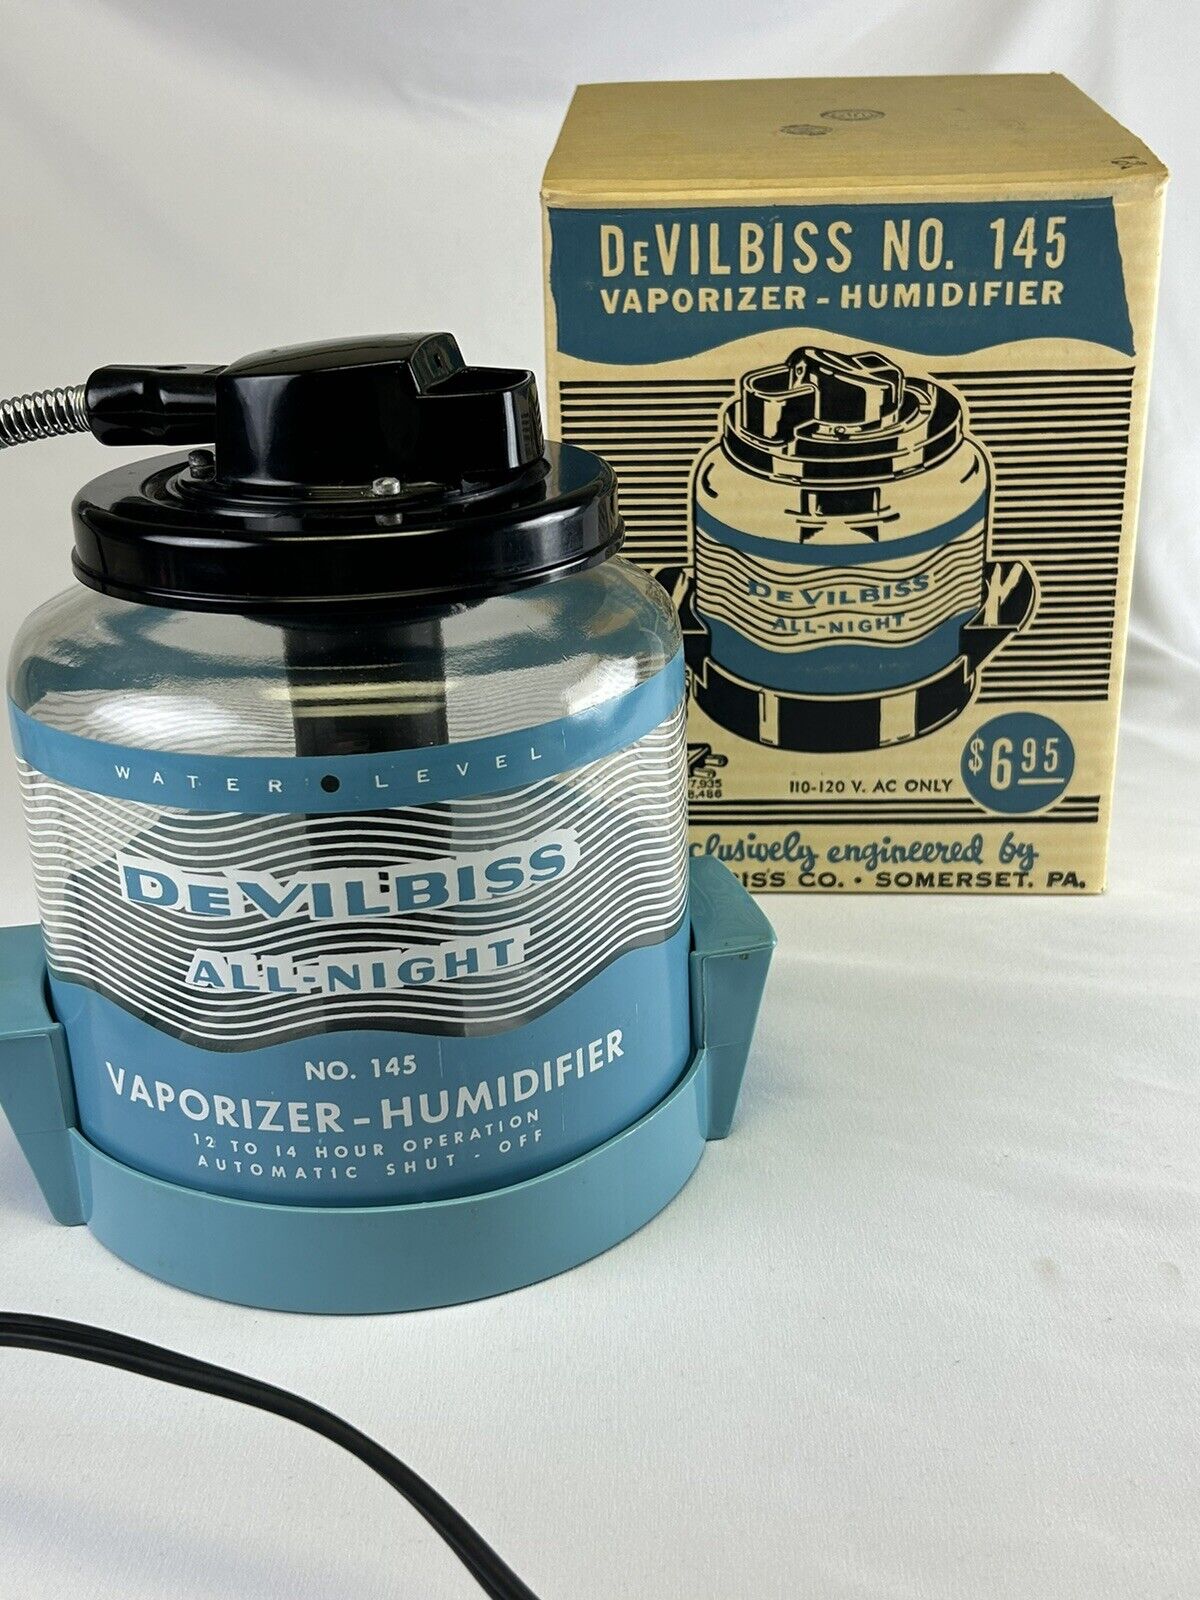 Excellent- Vintage 1950s DeVilbiss Model 145 Vaporizer-Humidifier All Night Work